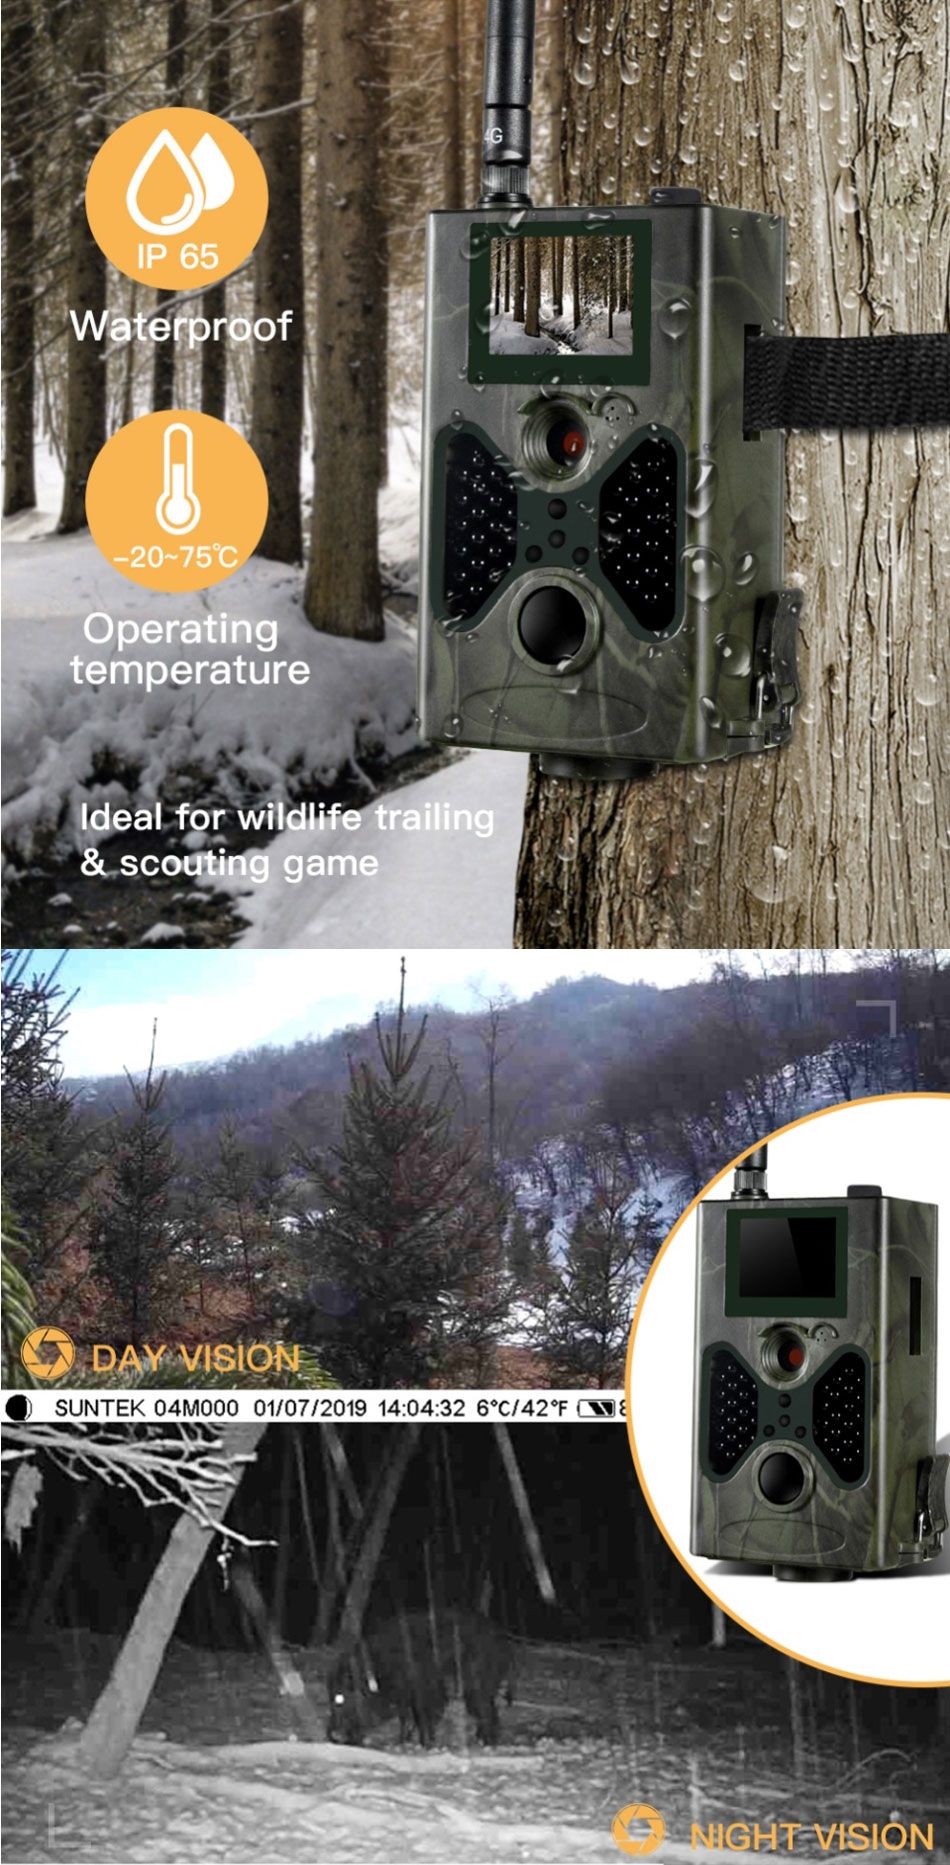 HC-330LTE-Waterproof-4G-16MP-1080P-SMTP-SMS-Infrared--Wildlife-Trail-Track-Hunting-Camera-Night-Vers-1447235